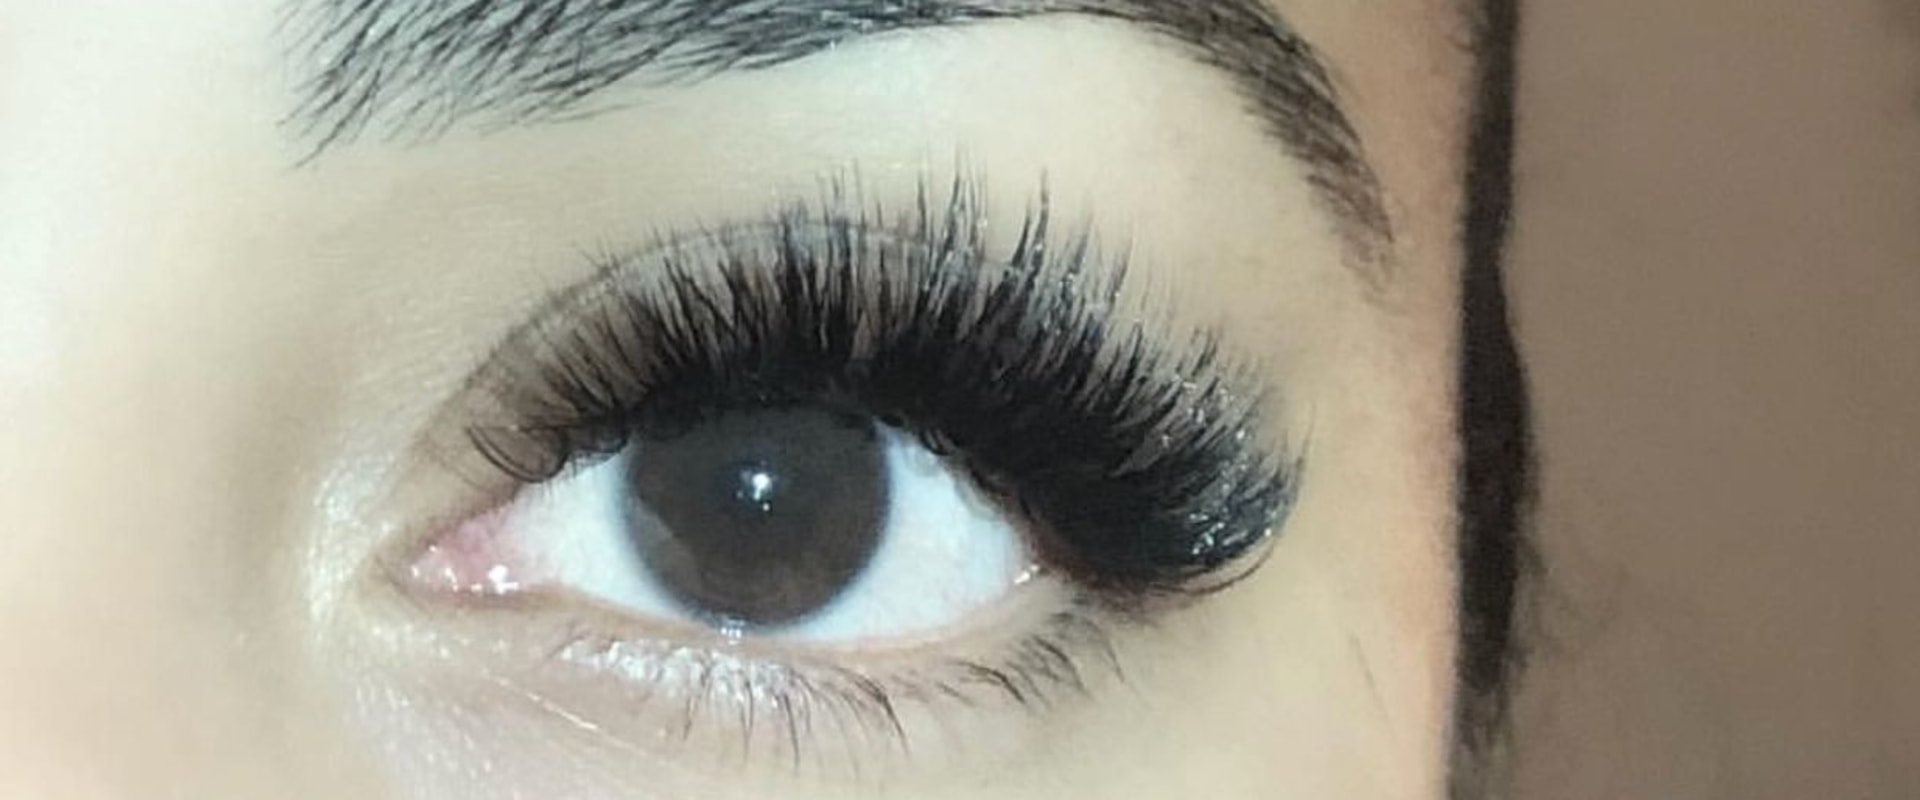 What is wispy volume lashes?